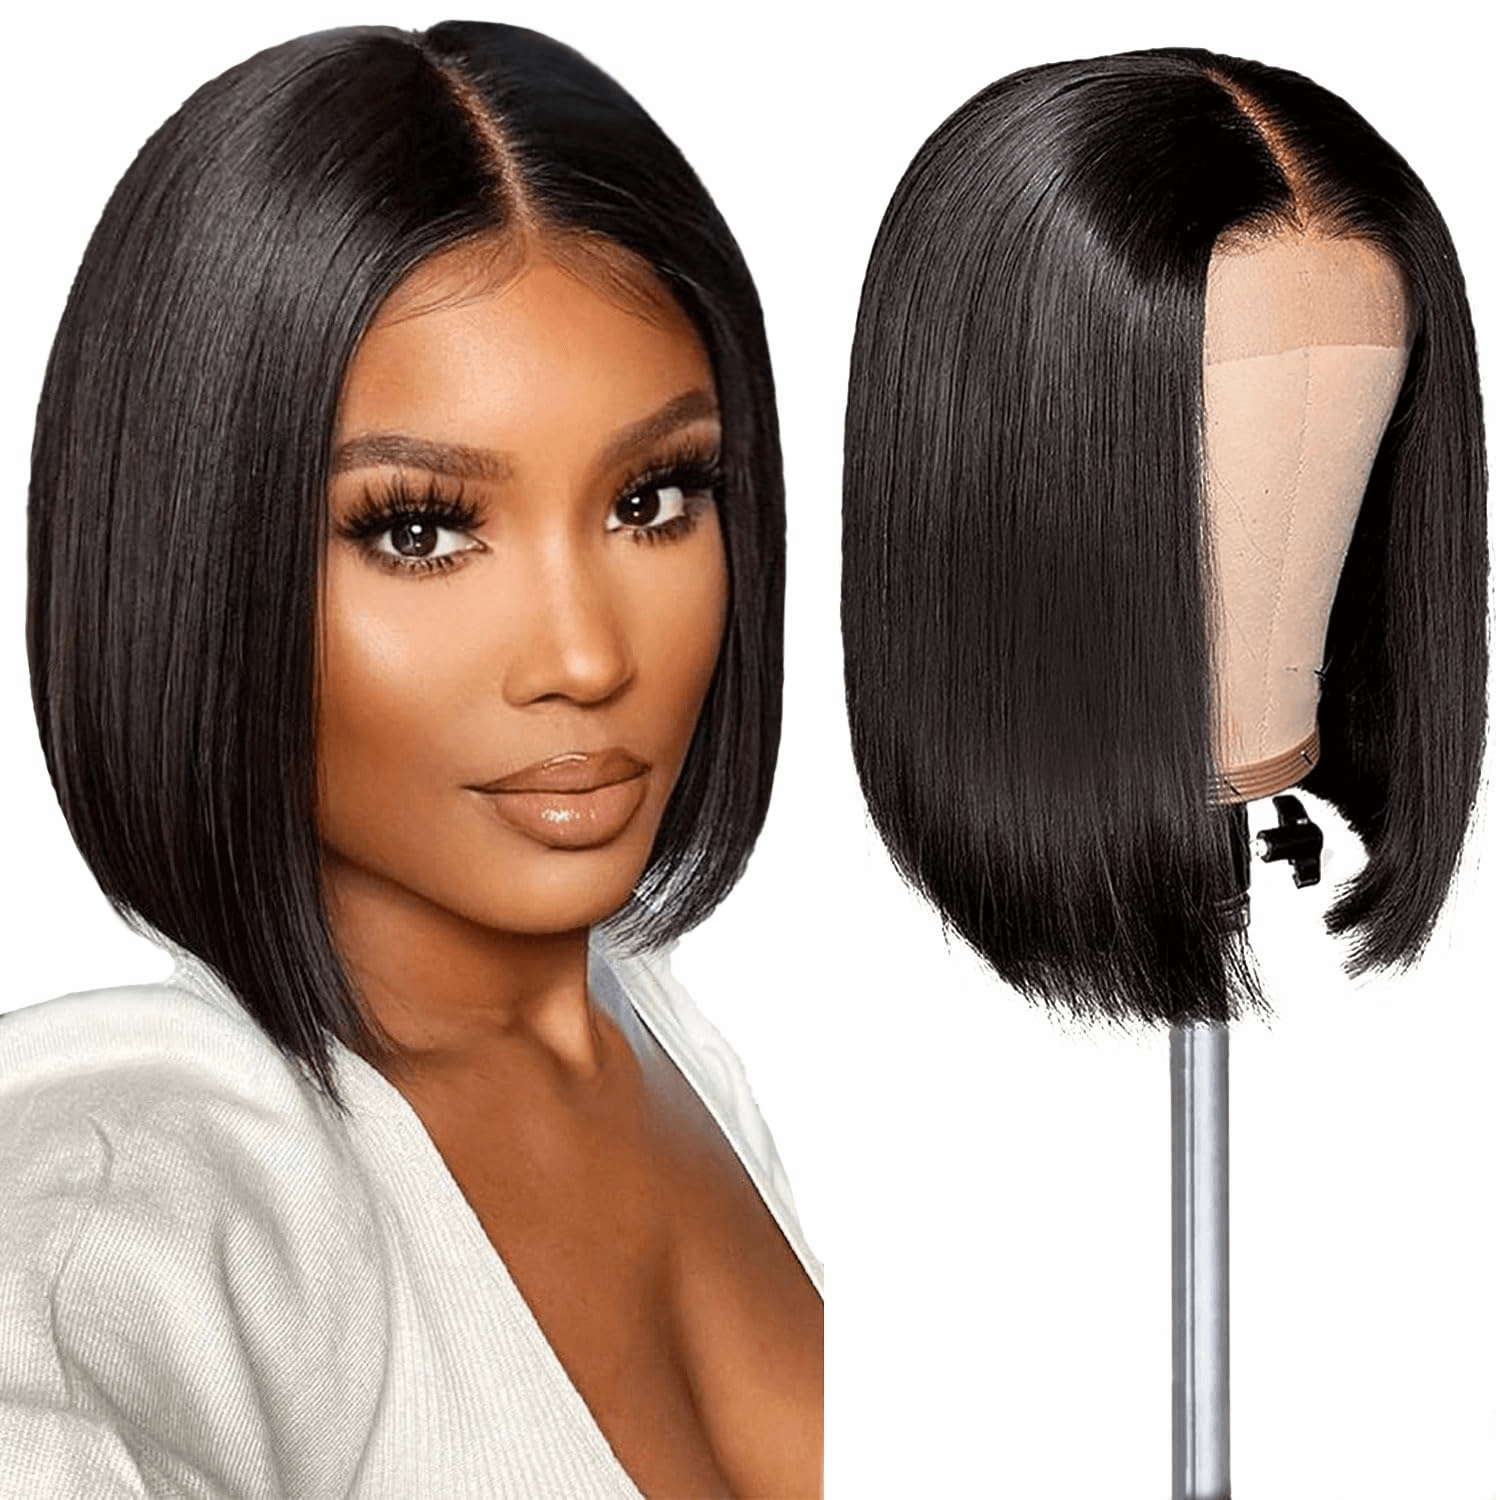 Wesface Wigs 4X4 Lace Closure Bob Wigs Human Hair Straight Short Bob Glueless Wigs Undetectable Transparent Lace Wig Pre Plucked for Women